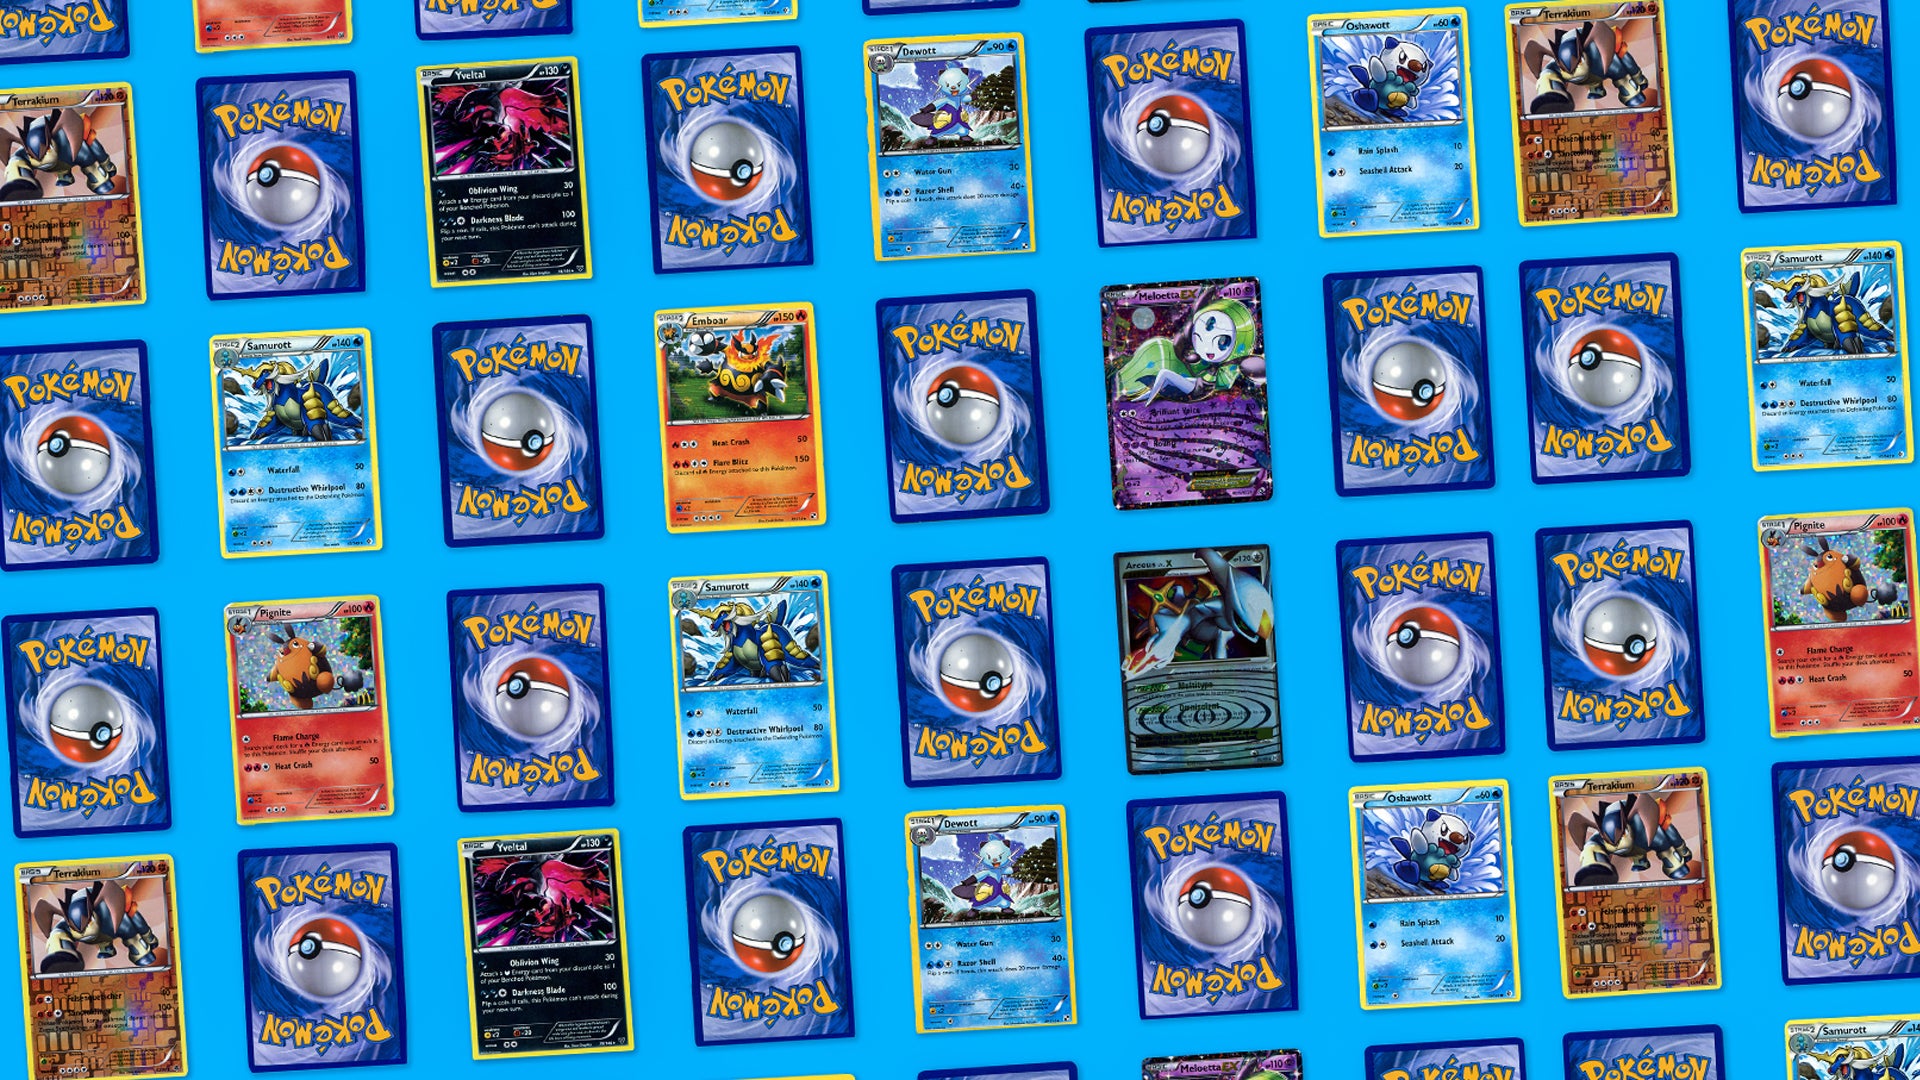 Pokemon cards arranged in a pattern, with both card fronts and backs visible